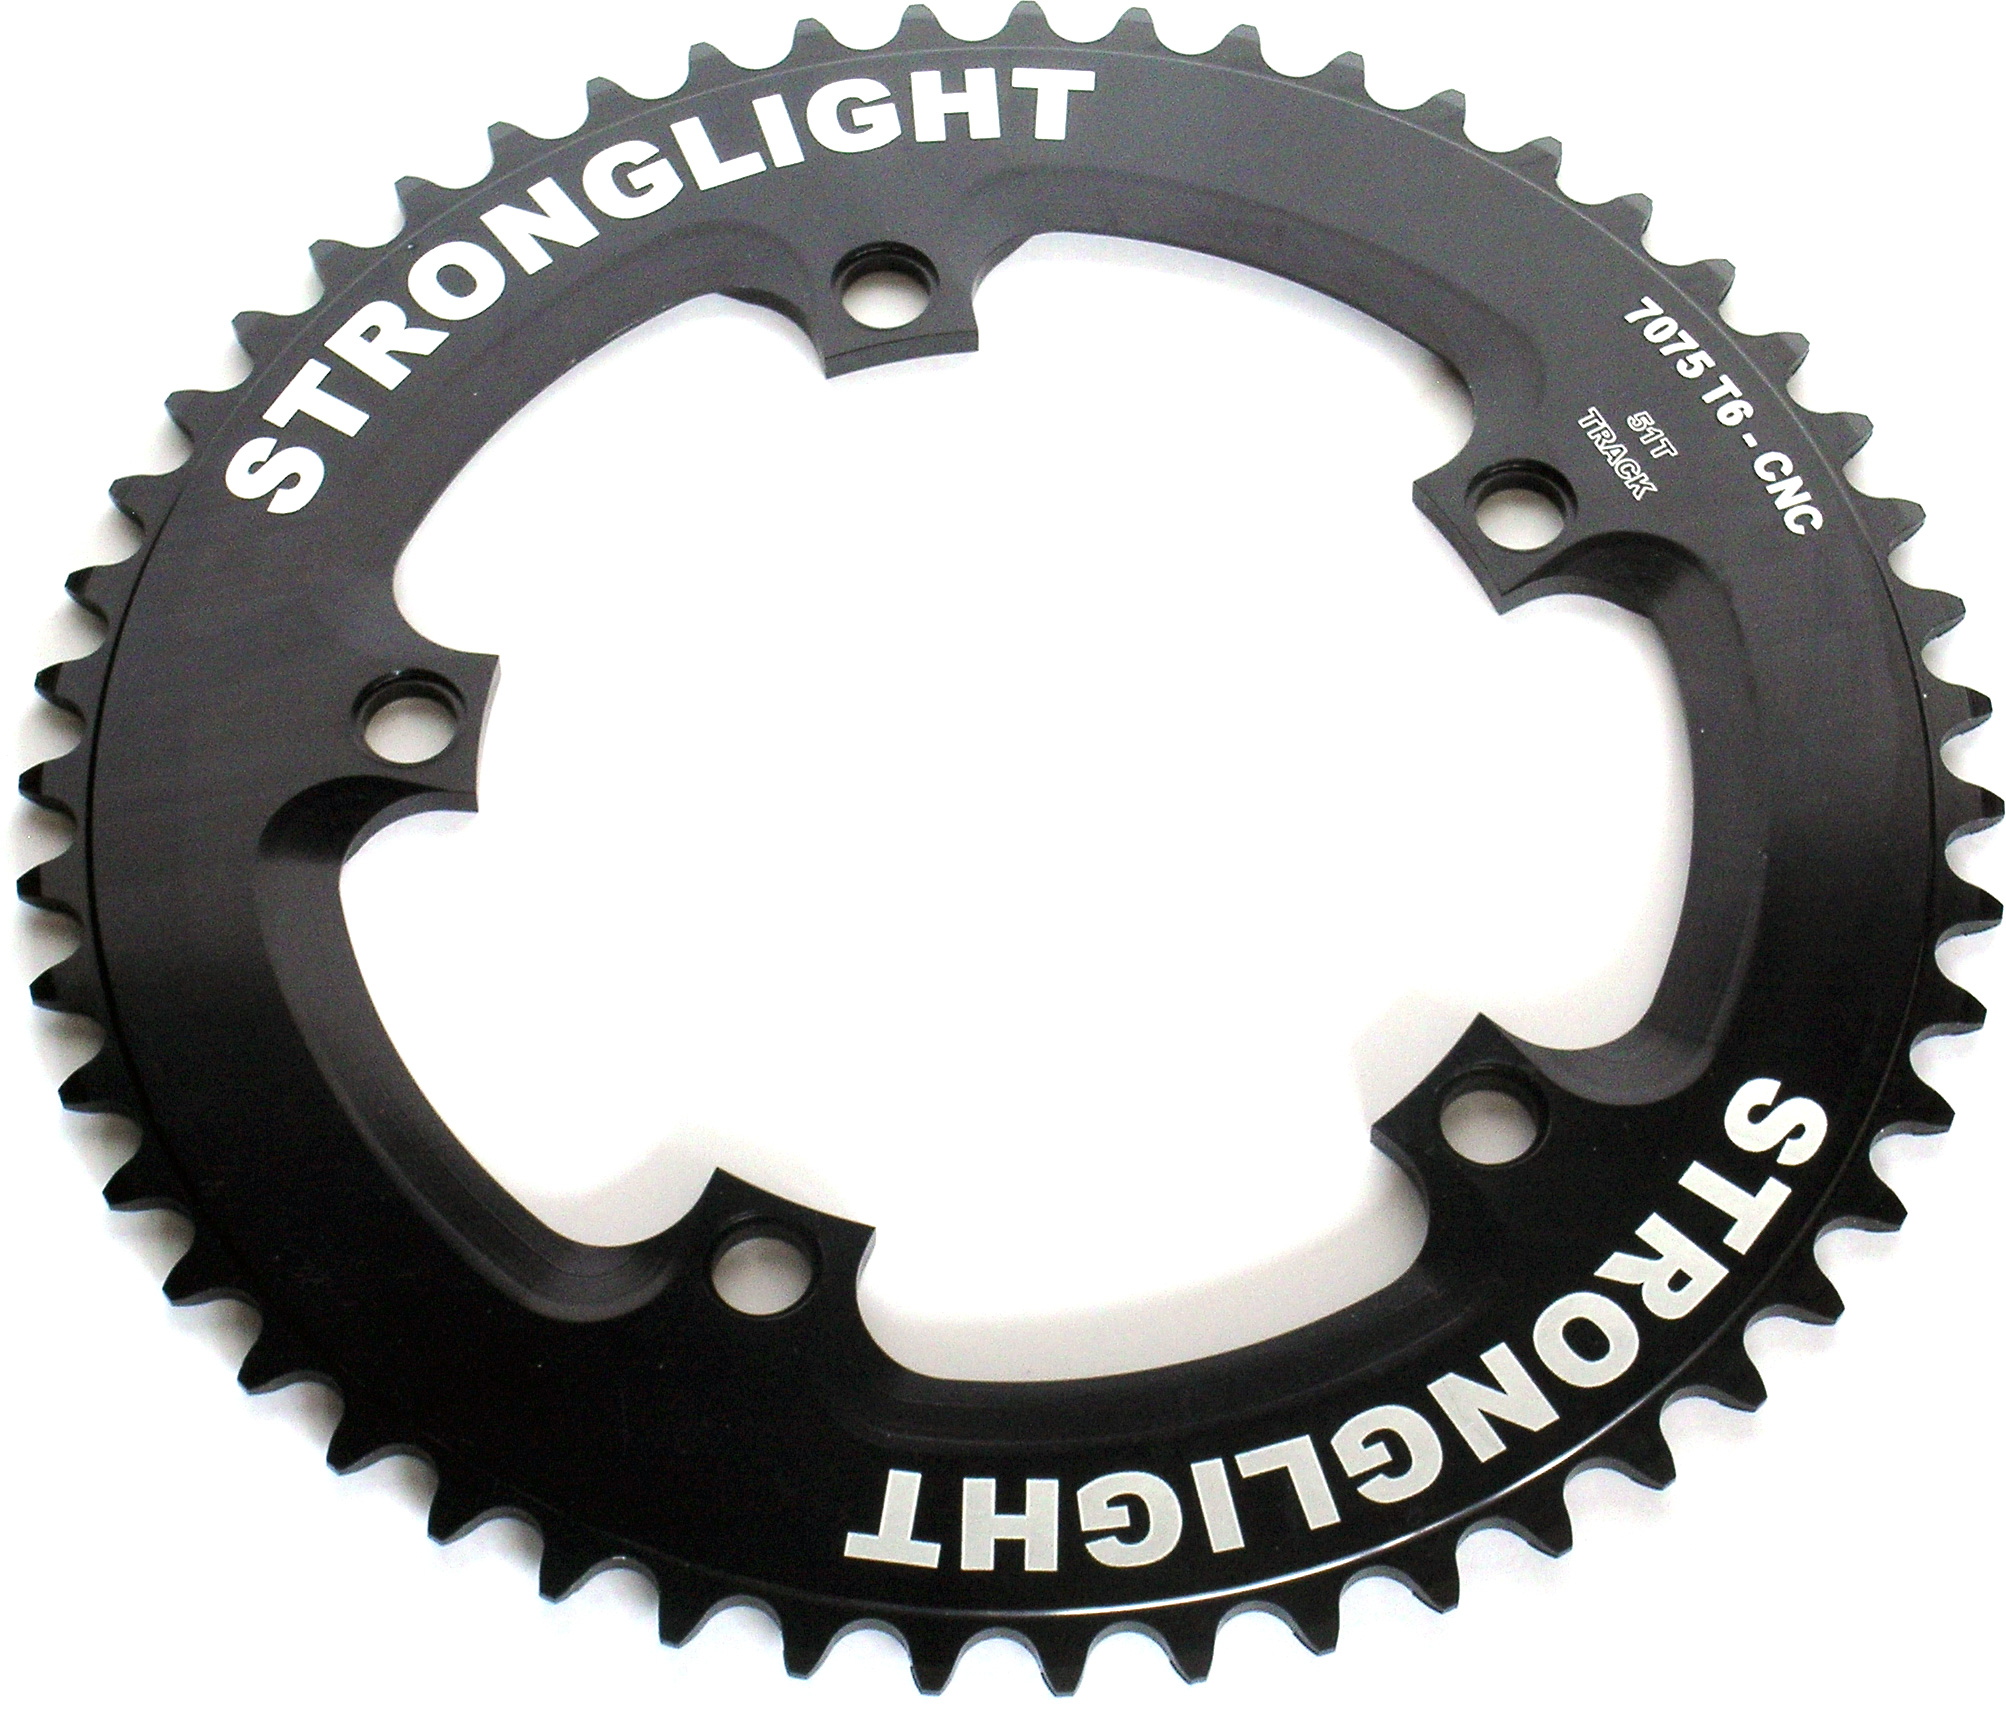 RT130Z48 Stronglight Black 48T 5-Arm/130mm Track Chainring